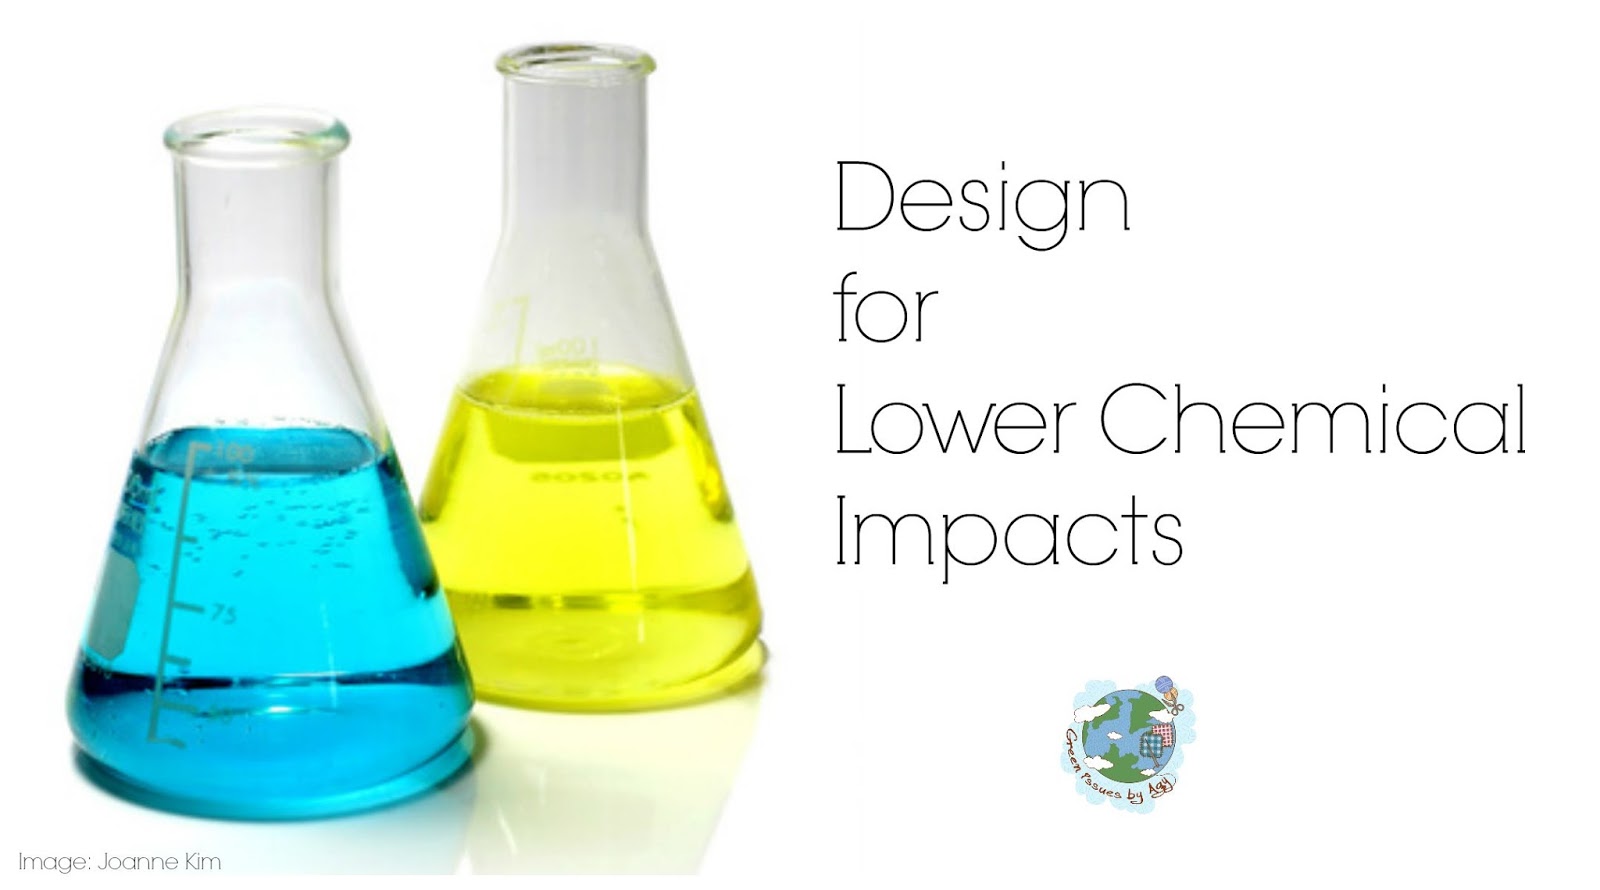 Design for Lower Chemical Impacts